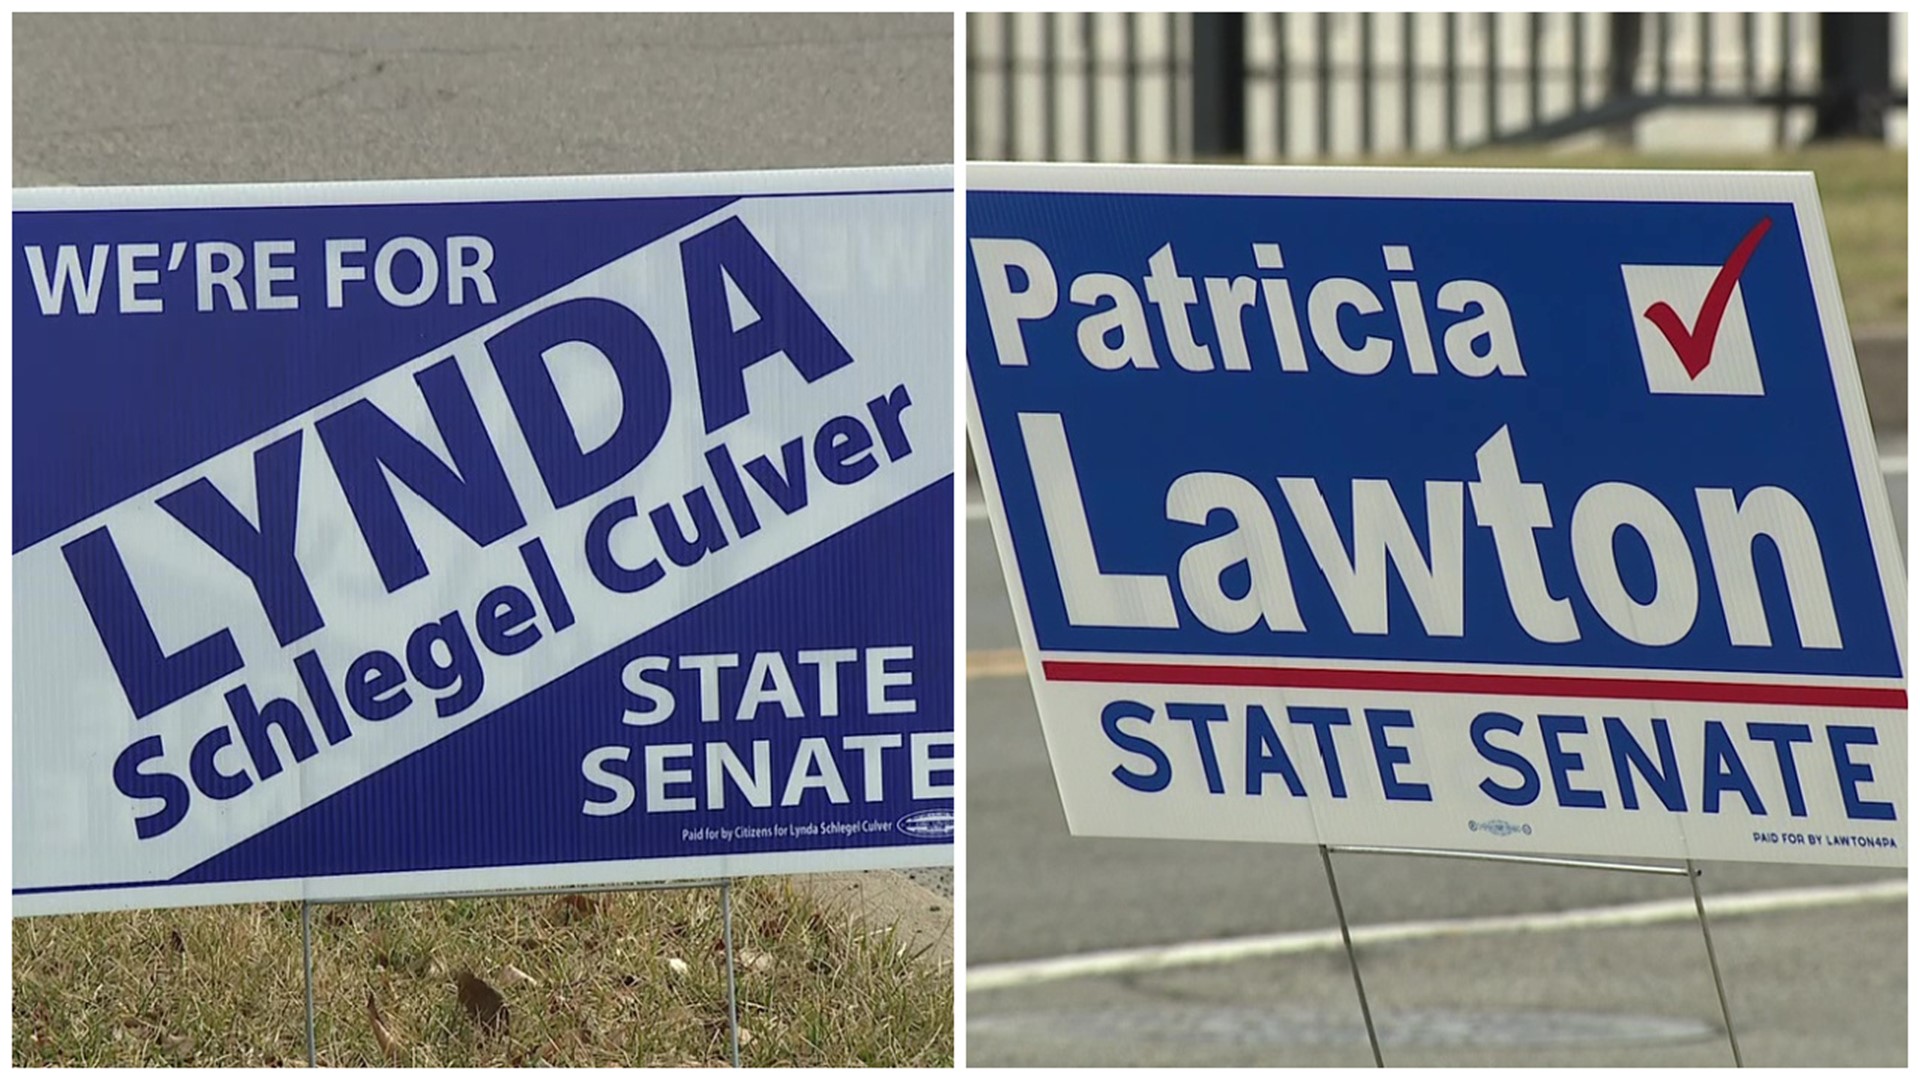 Voters in parts of central Pennsylvania and lower Luzerne County are electing a new state senator on Tuesday.